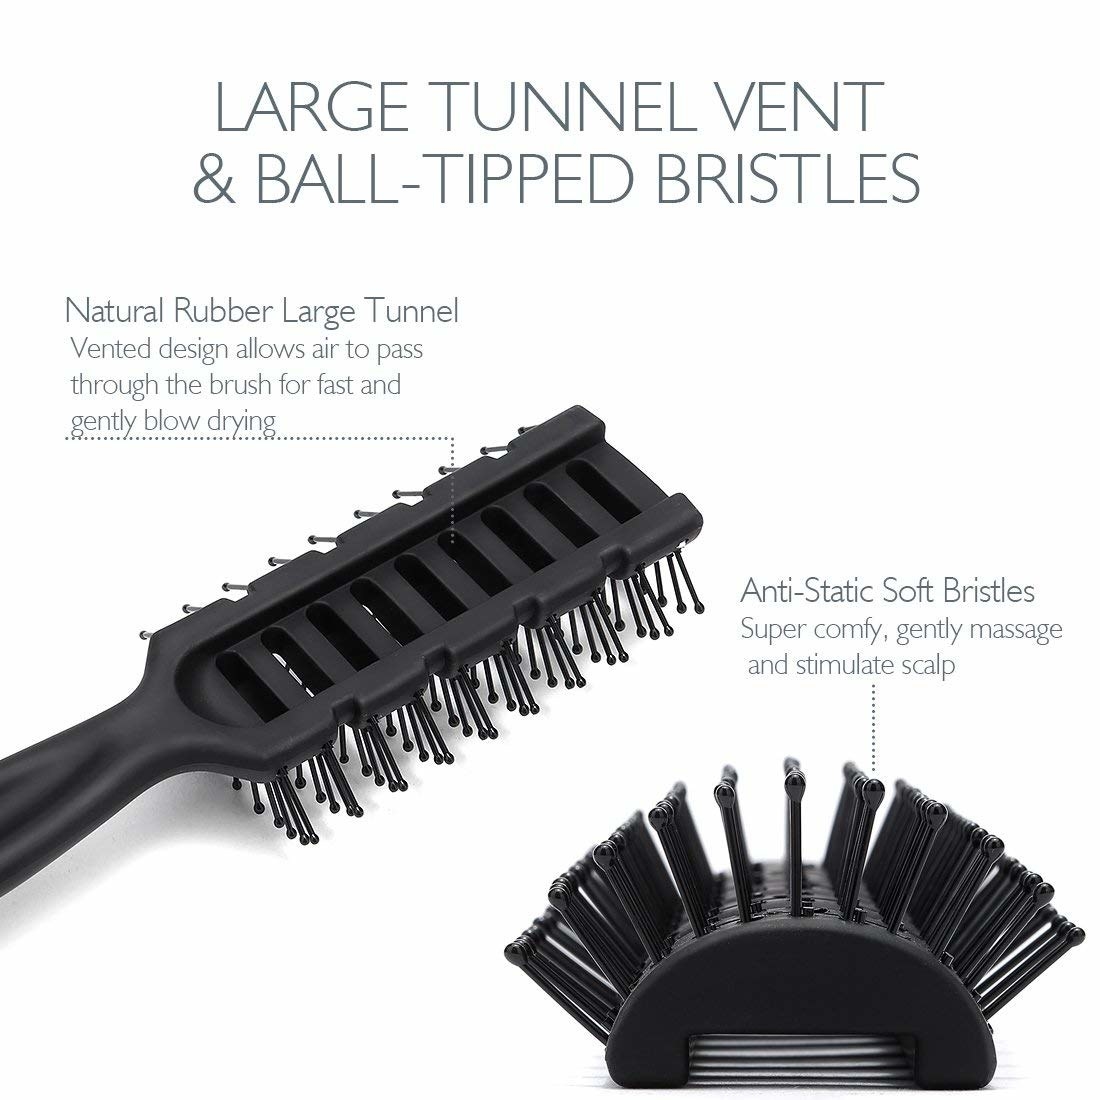 The curved brush with info about the rubber vents to allow air to pass and anti-static bristles that massage the scalp